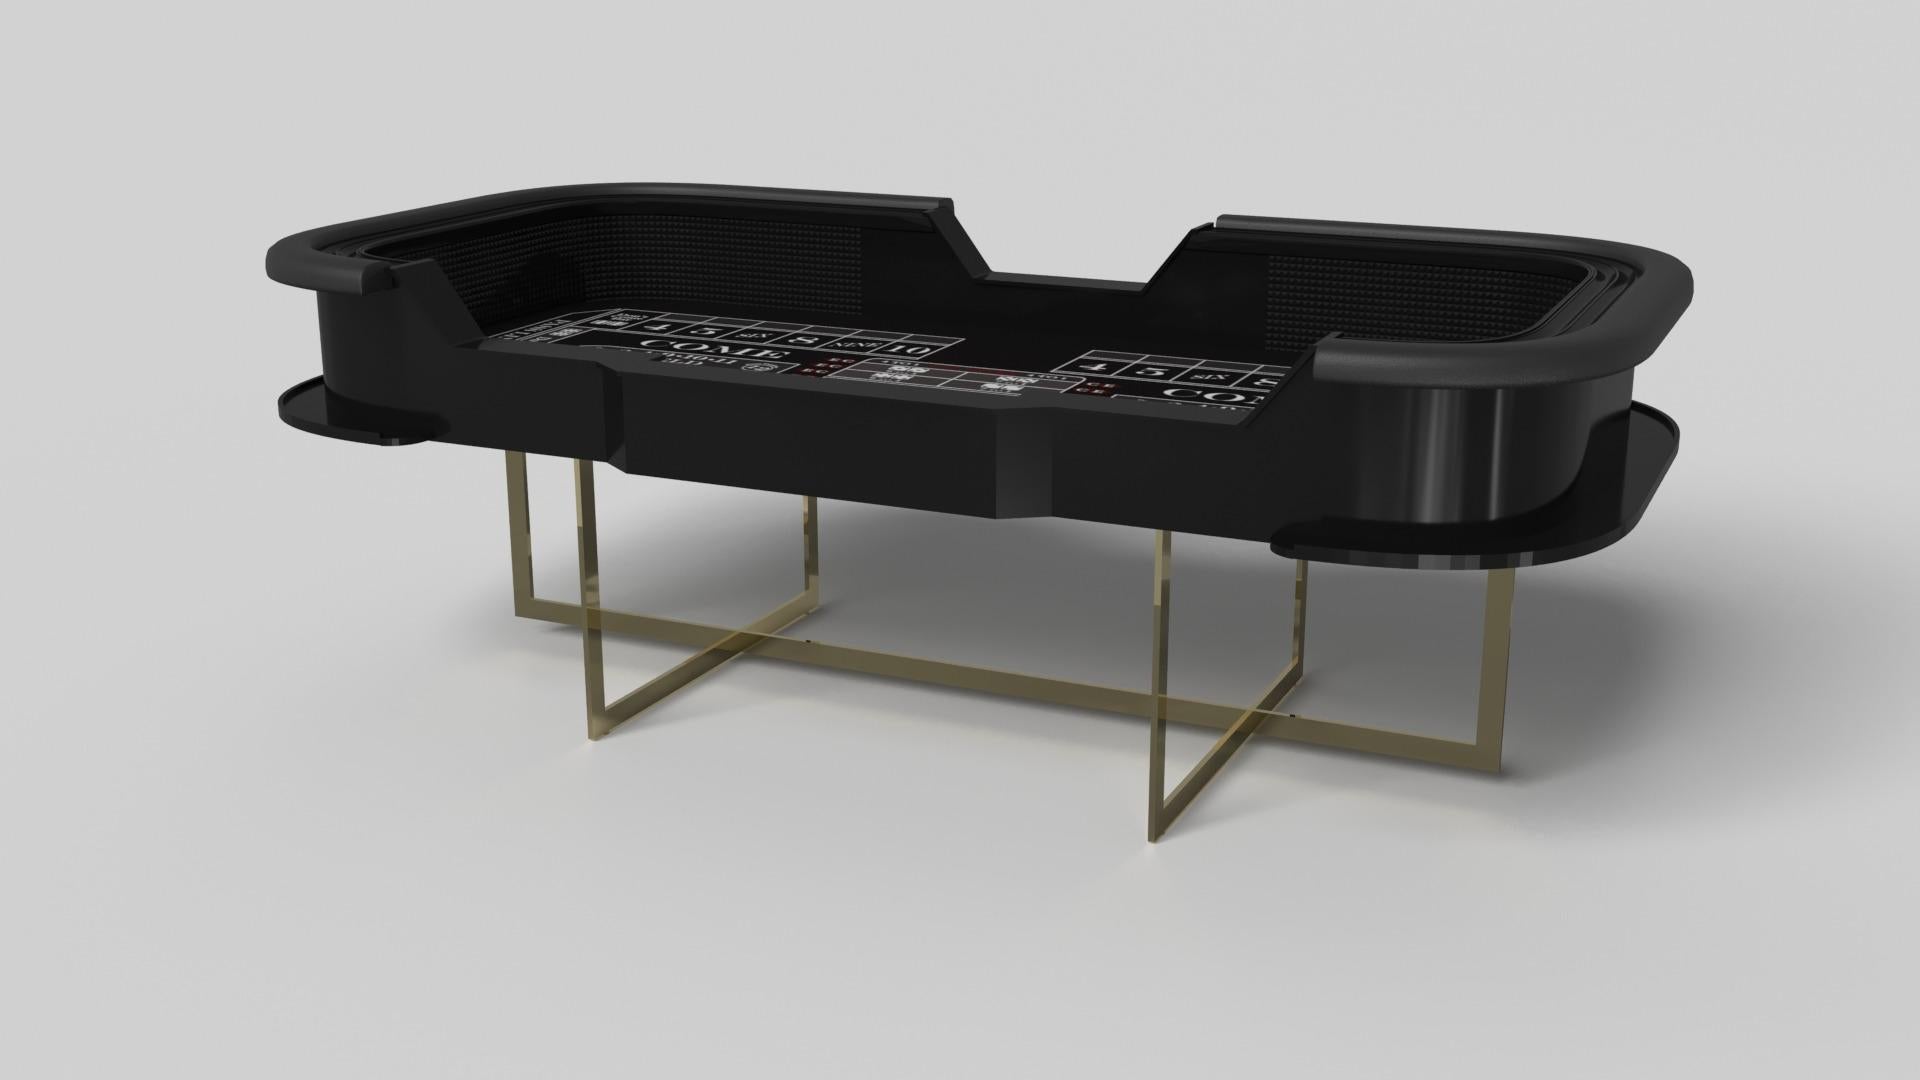 With an open metal foundation, our Beso table is a unique expression of contemporary forms and negative space. This craps table is handcrafted by our master artisans with a rectangle-in-rectangle base that echoes the angles and edges of a regulation